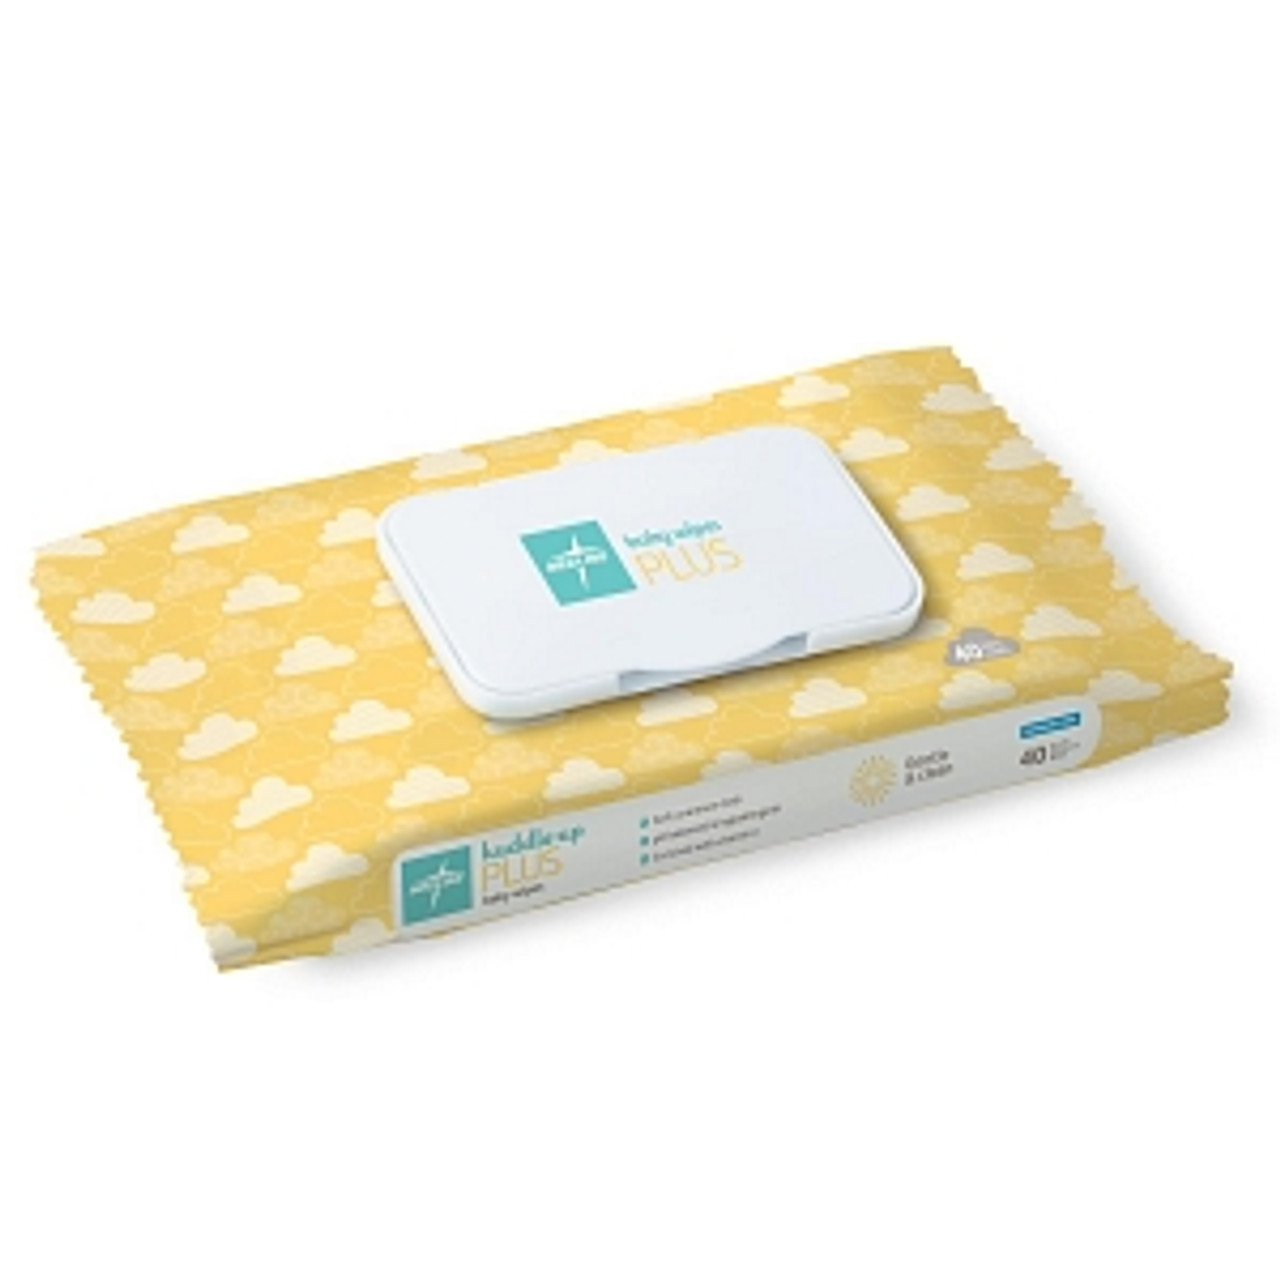 Baby wipes are made to be soft and gentle on baby's sensitive skin
Hypoallergenic, pH balanced
Fragrance-free
Conveniently packaged in a soft, resealable pouch